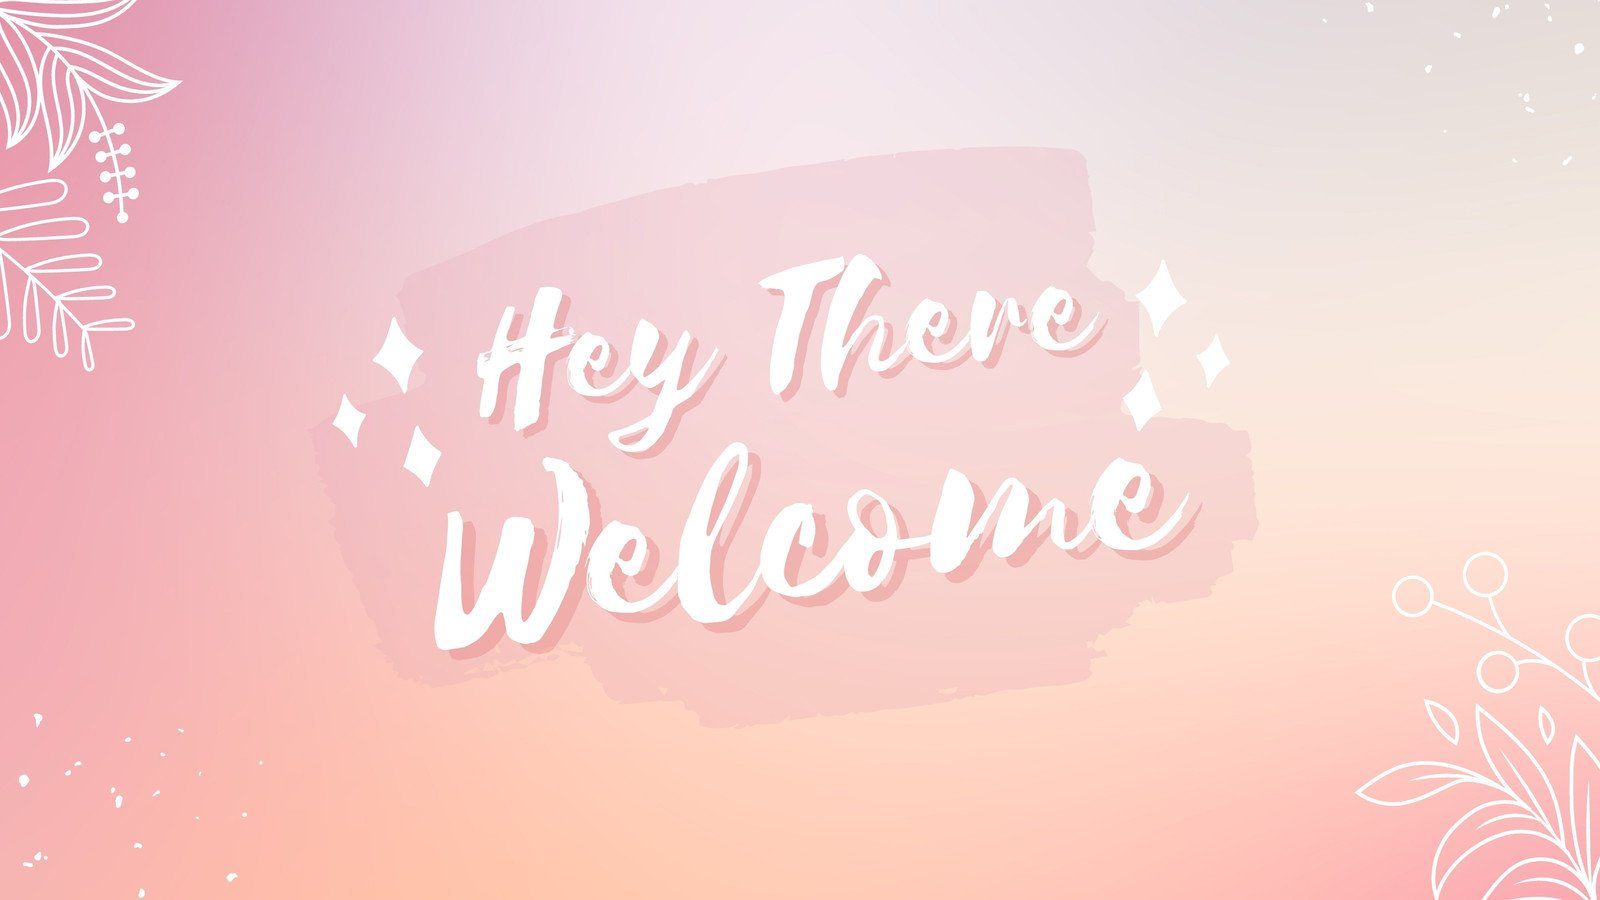 A pastel pink and orange gradient background with white foliage and white text that says 